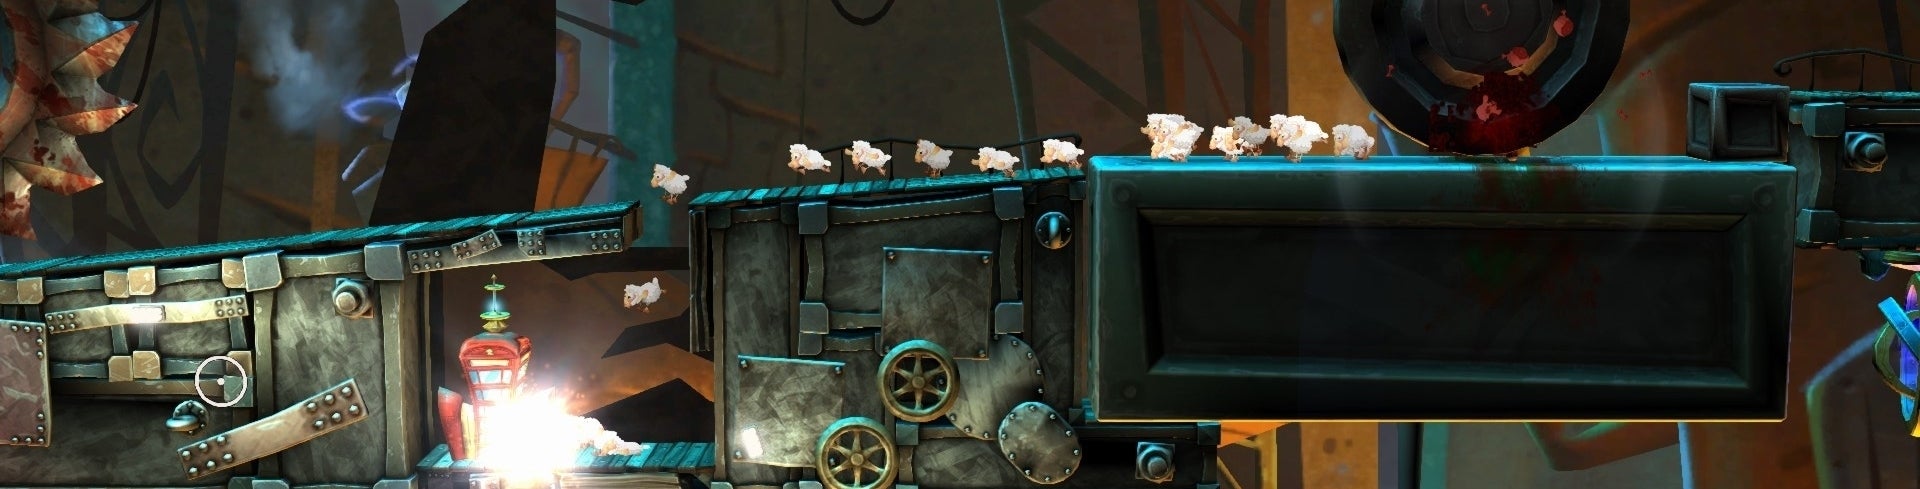 Image for Team17 moves on from Worms with Lemmings-inspired Flockers